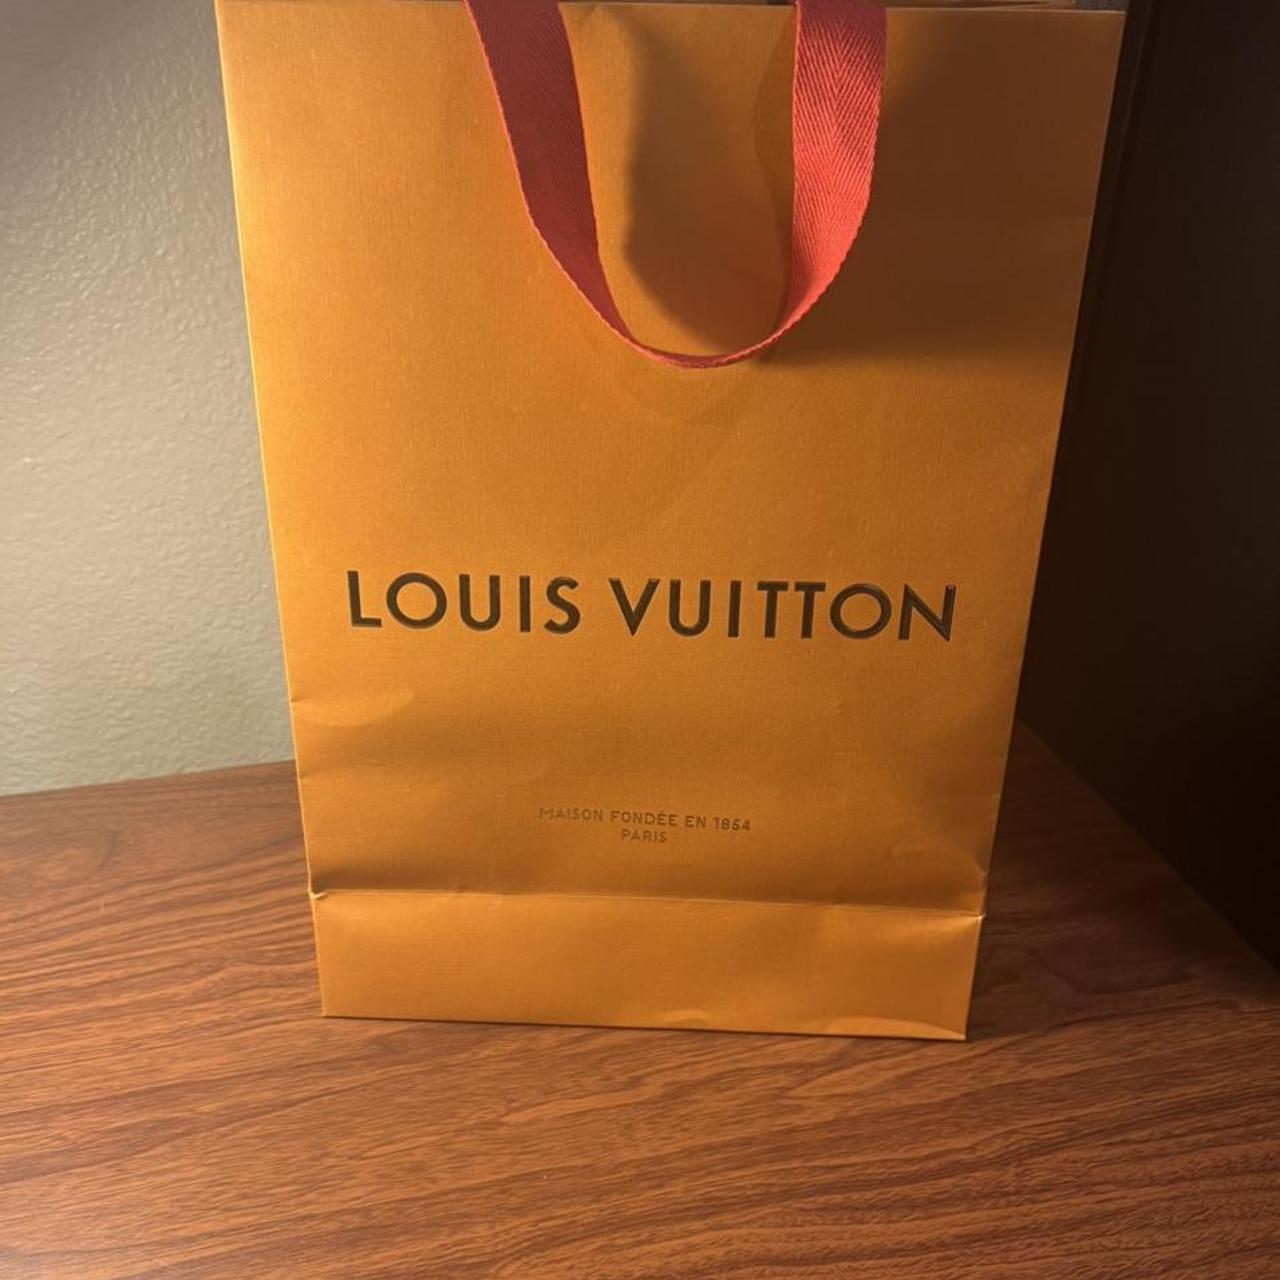 Soooo I decided to take an old Louis Vuitton shopping bag 🛍 and